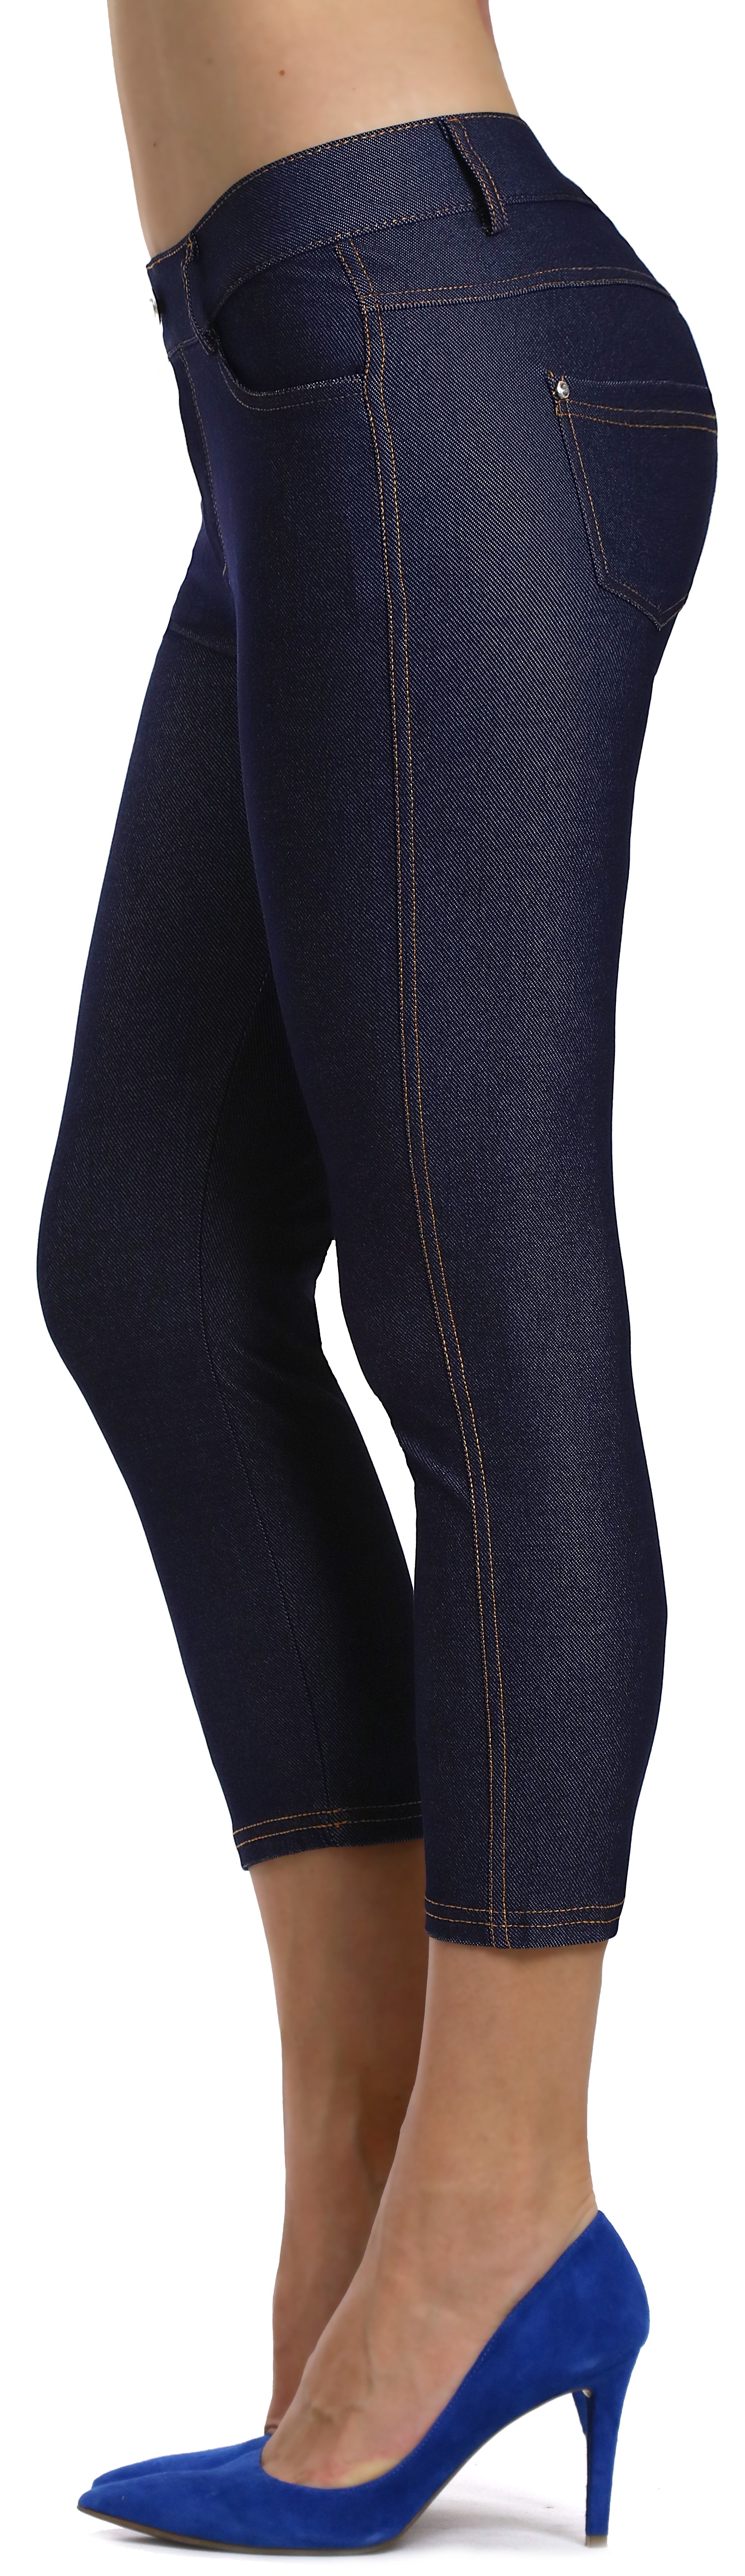  Prolific Health Womens Jean Look Jeggings Tights